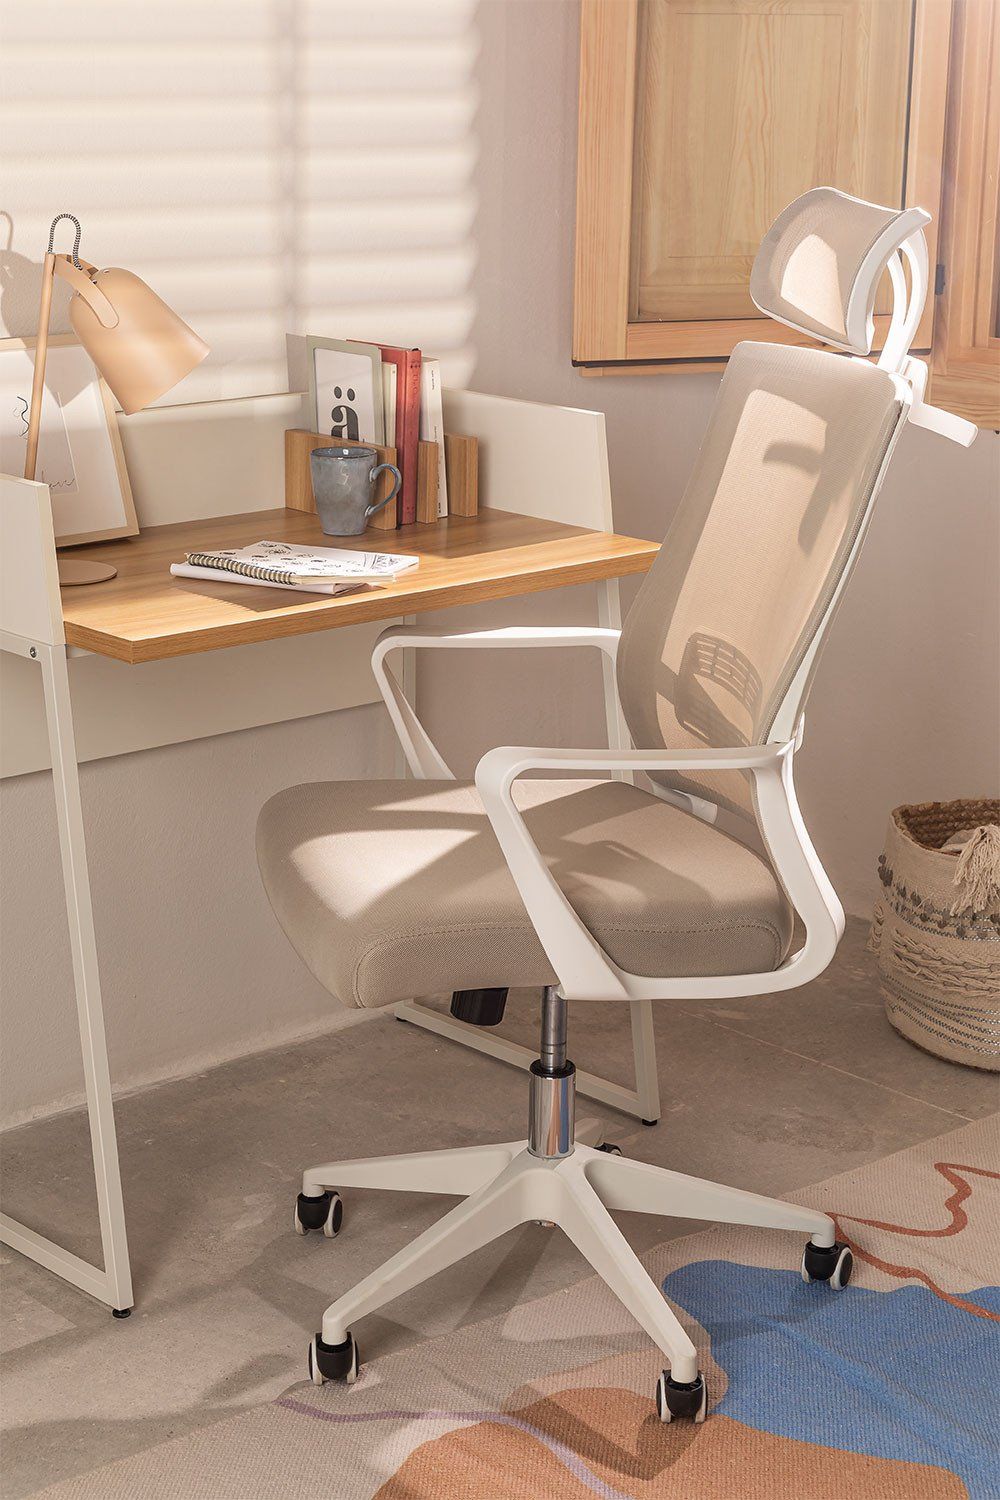 Workplace Comfort: Finding the Perfect Office Chairs